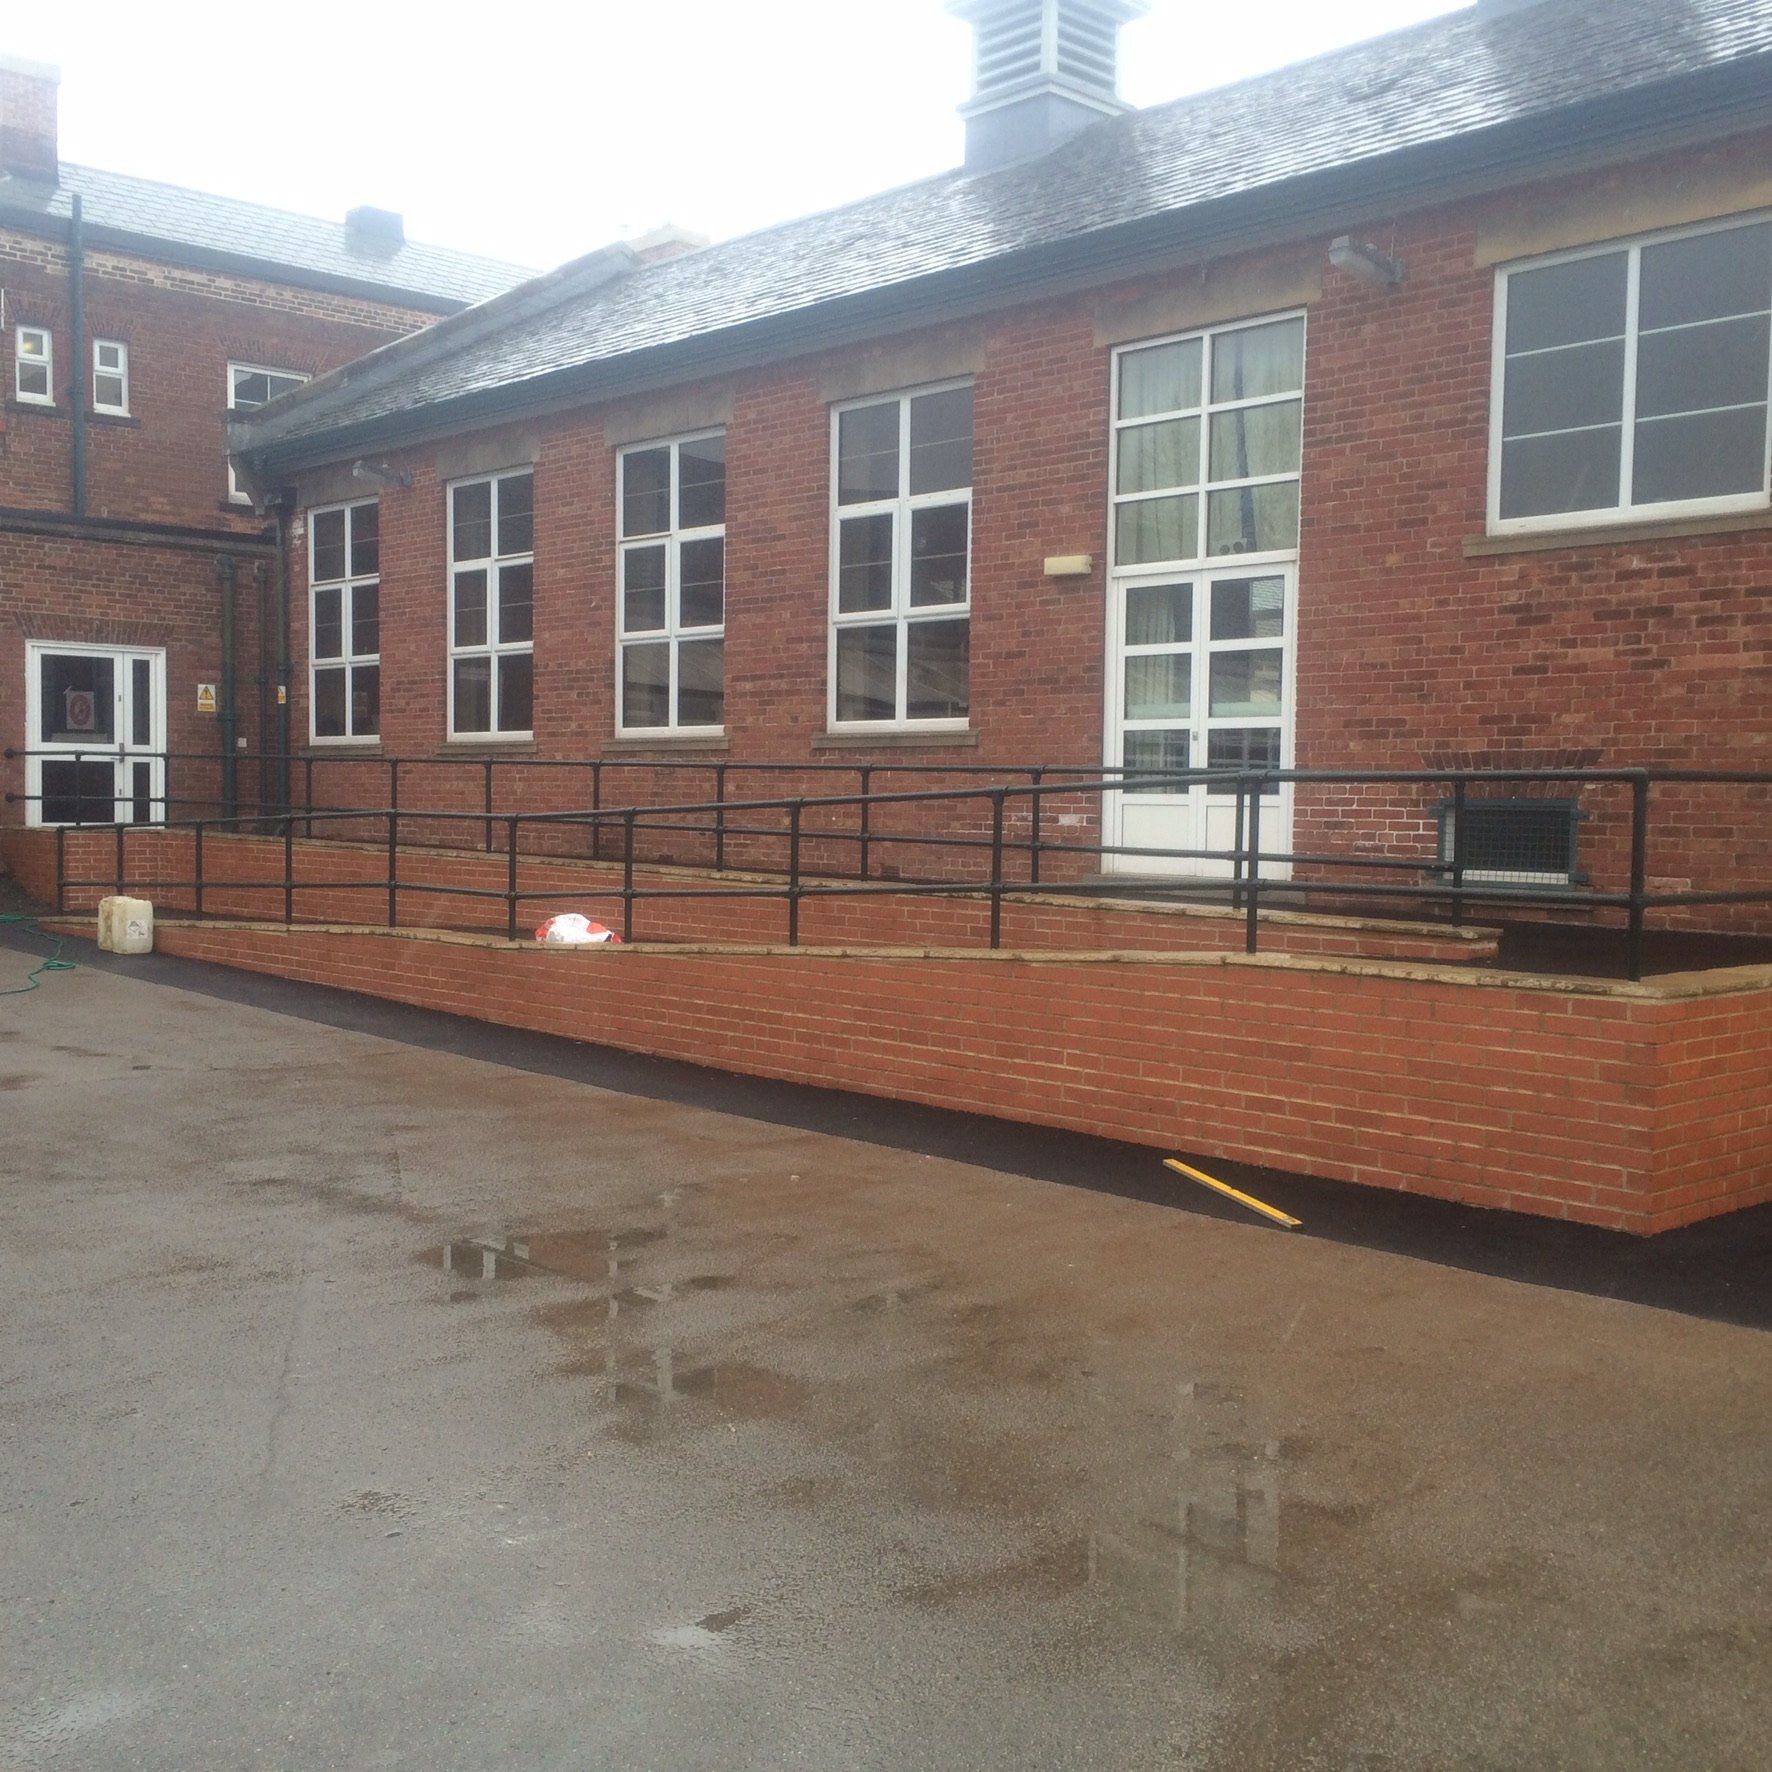 Disabled Access at a School After